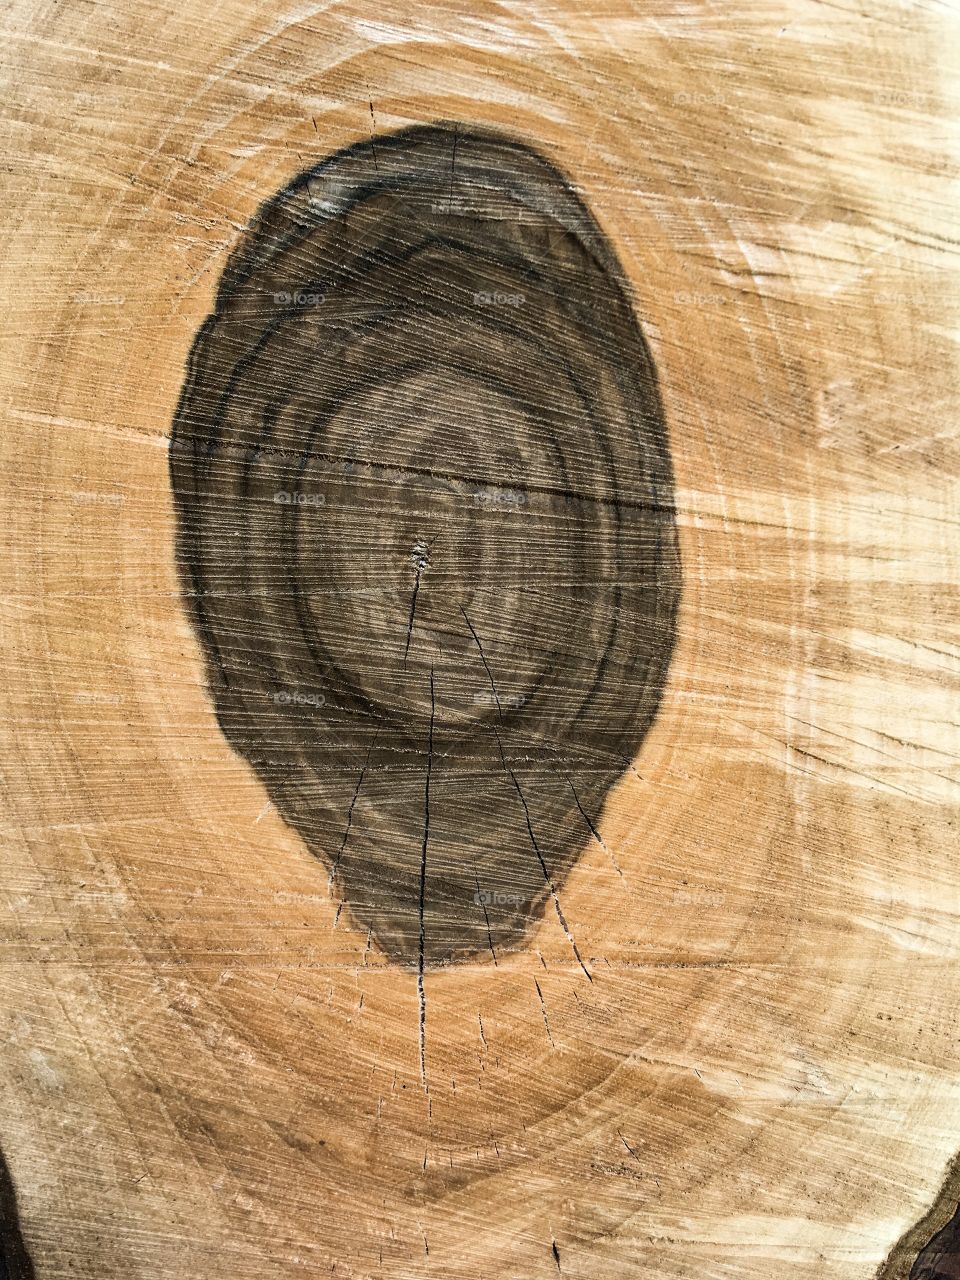 The saw cut wood. The tree trunk structure and surface. Wooden background. 